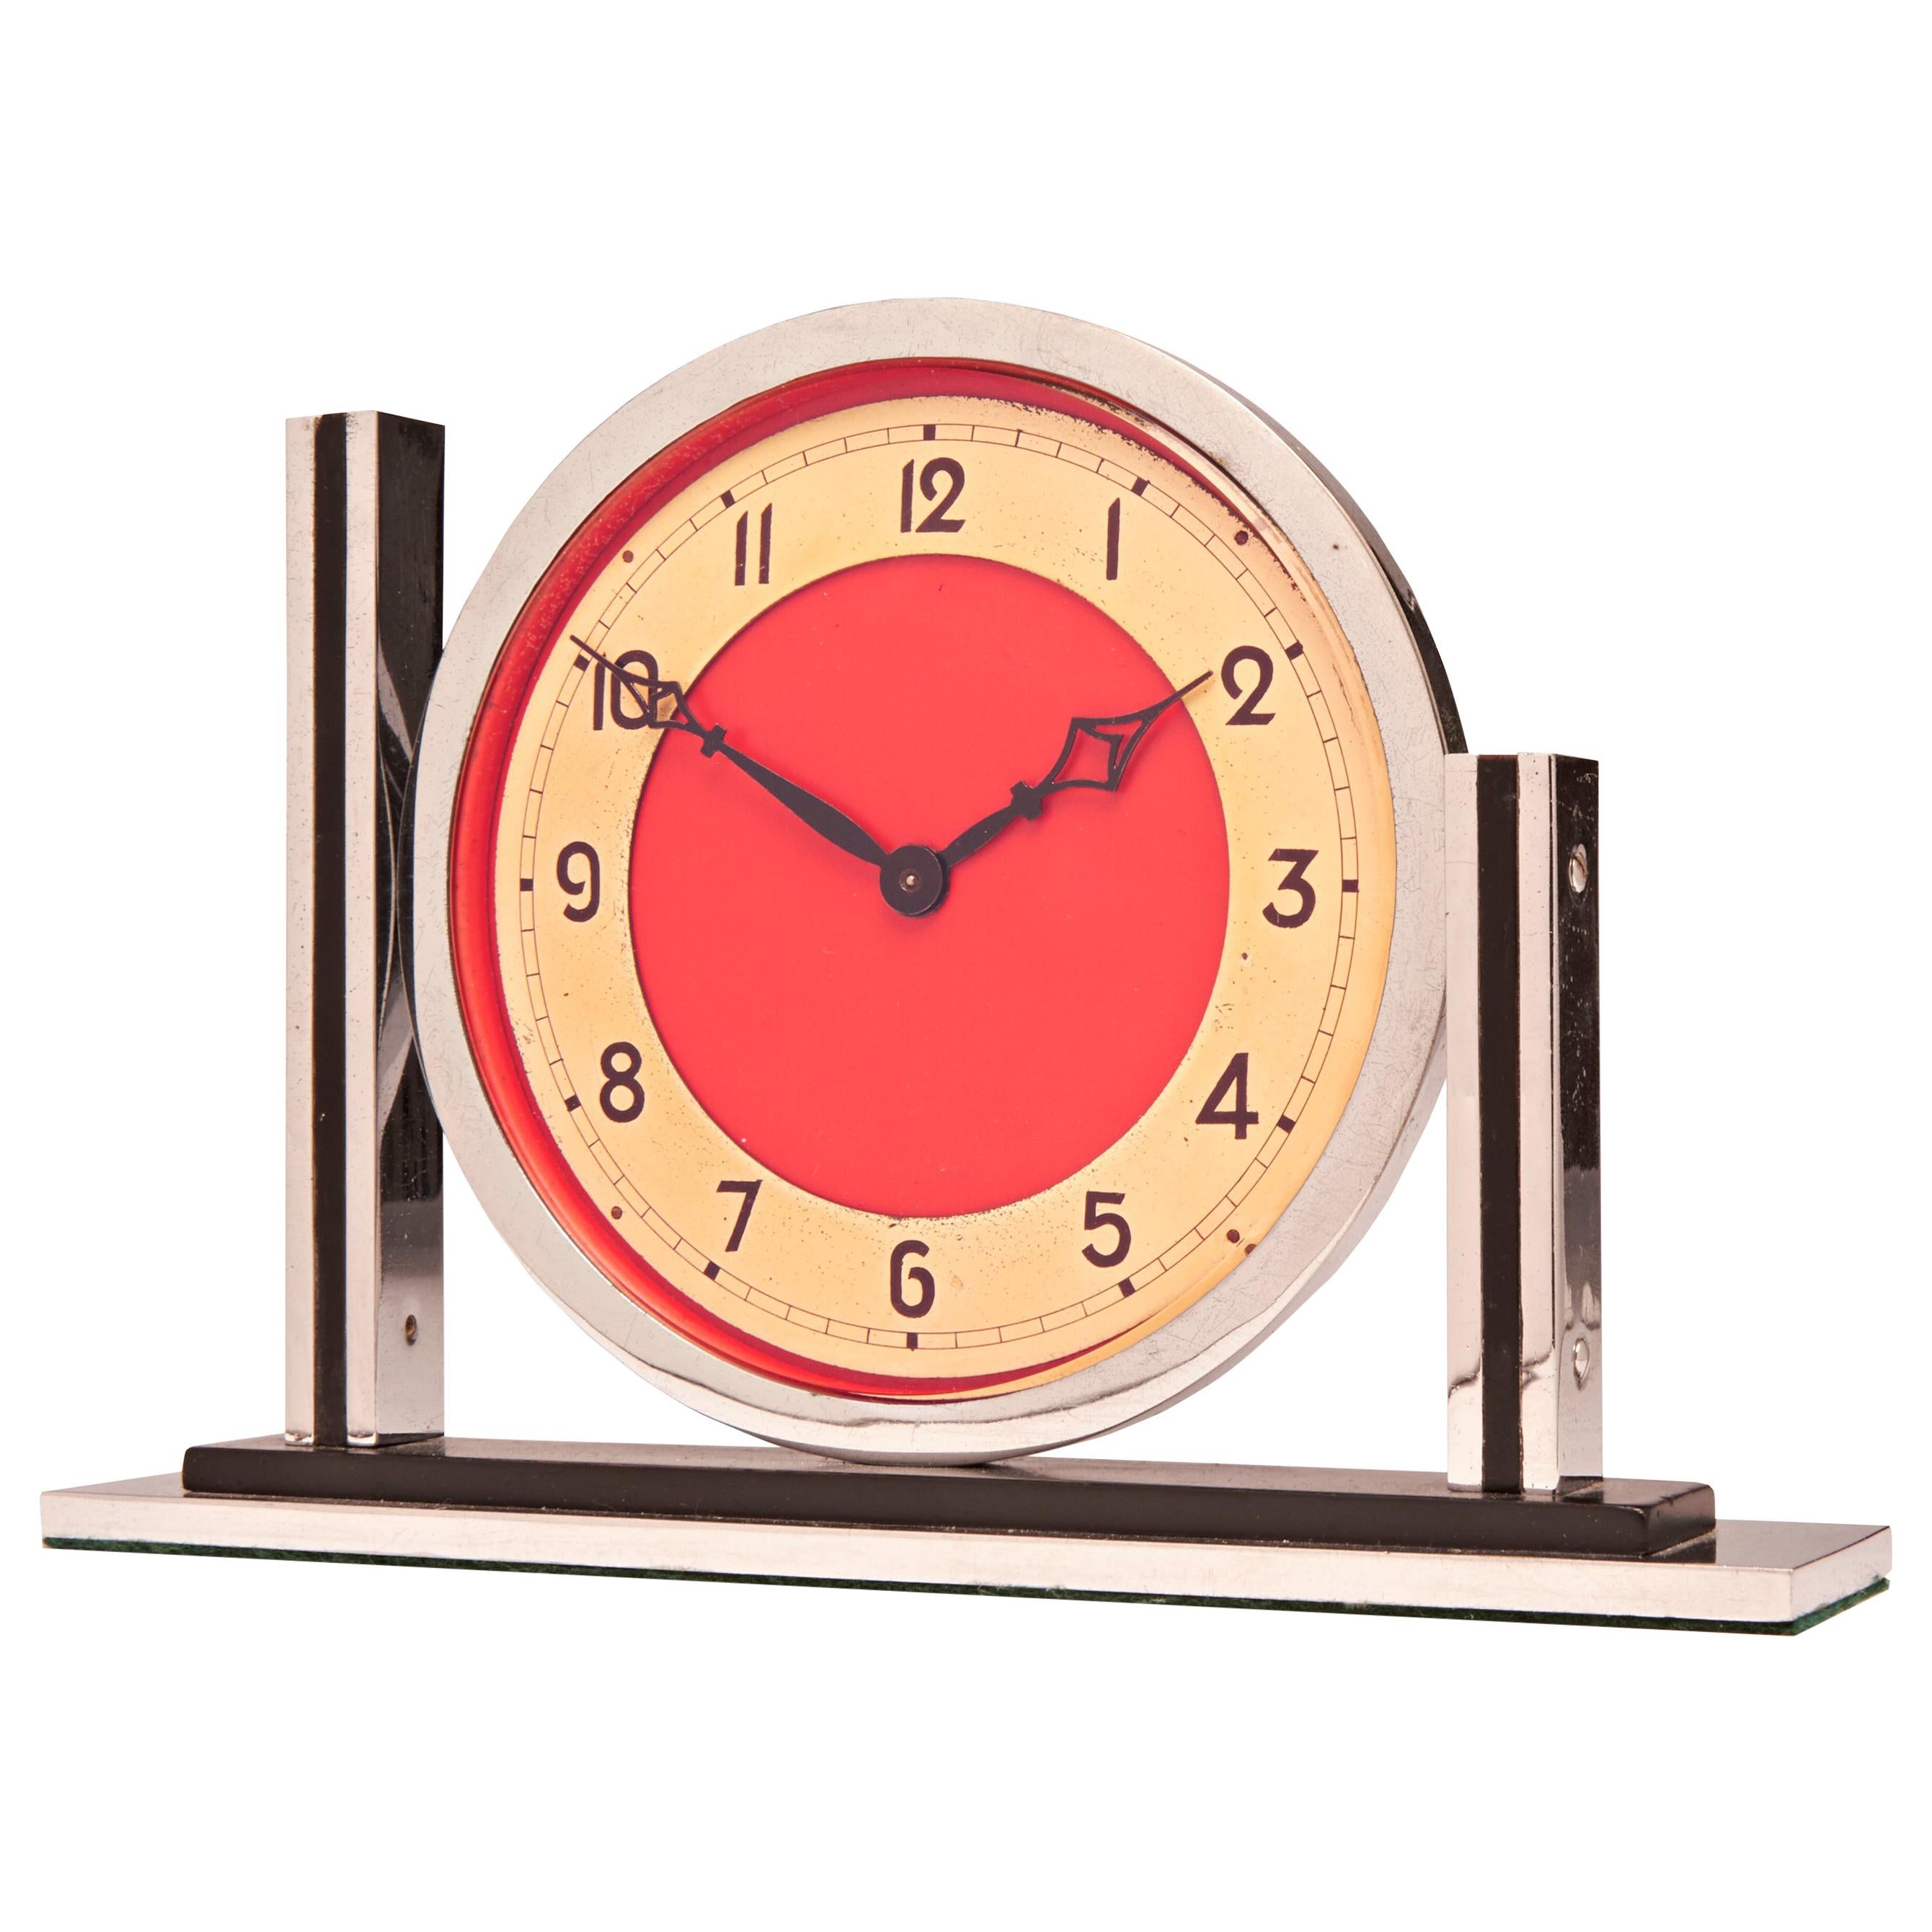 English Art Deco Chrome with Black, Red and Gold Tone Mechanical Mantel Clock